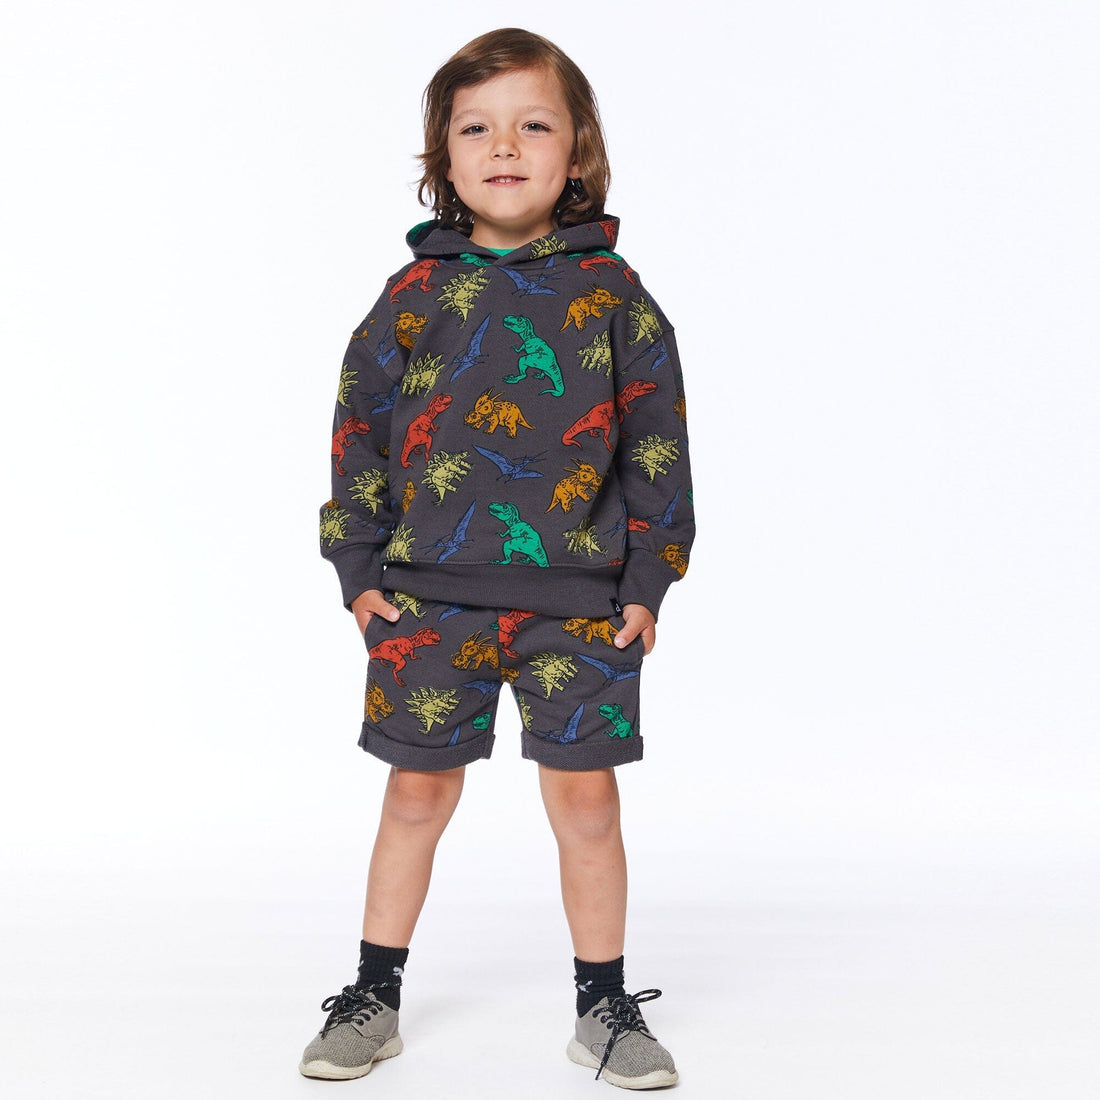 Printed French Terry Top With Hood Charcoal Grey Multicolor Dinosaurs